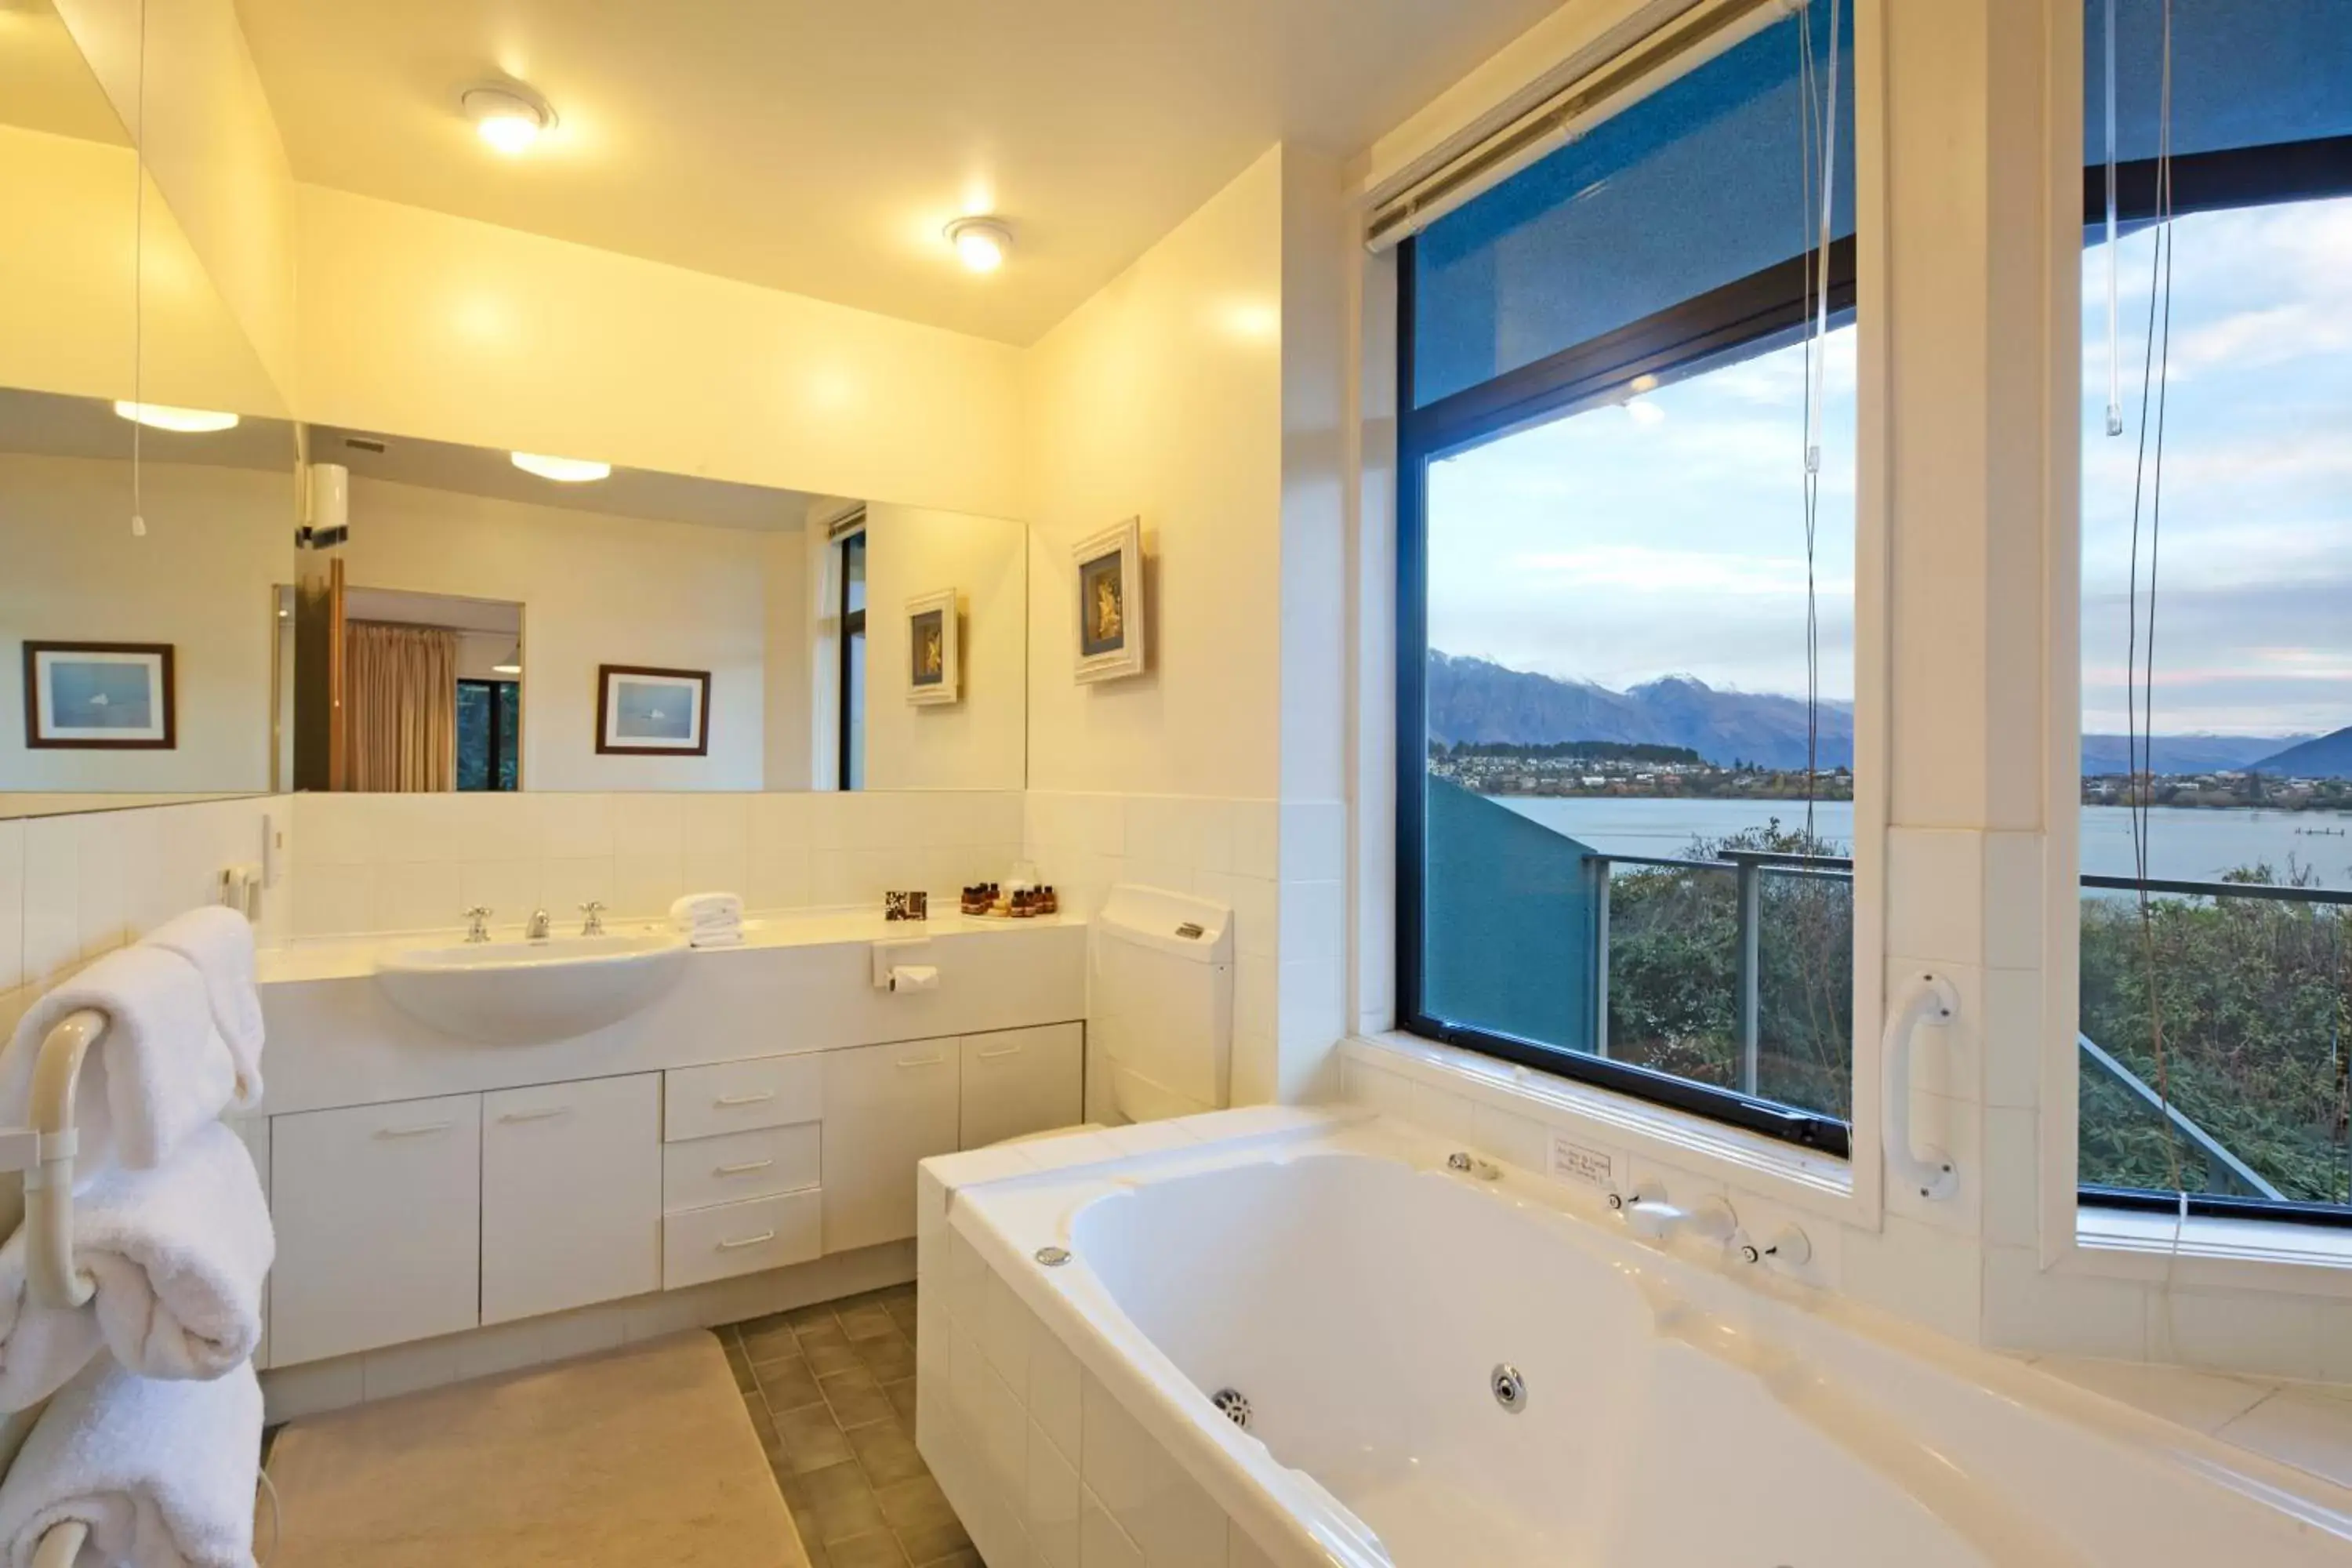 Bathroom in Apartments at Spinnaker Bay